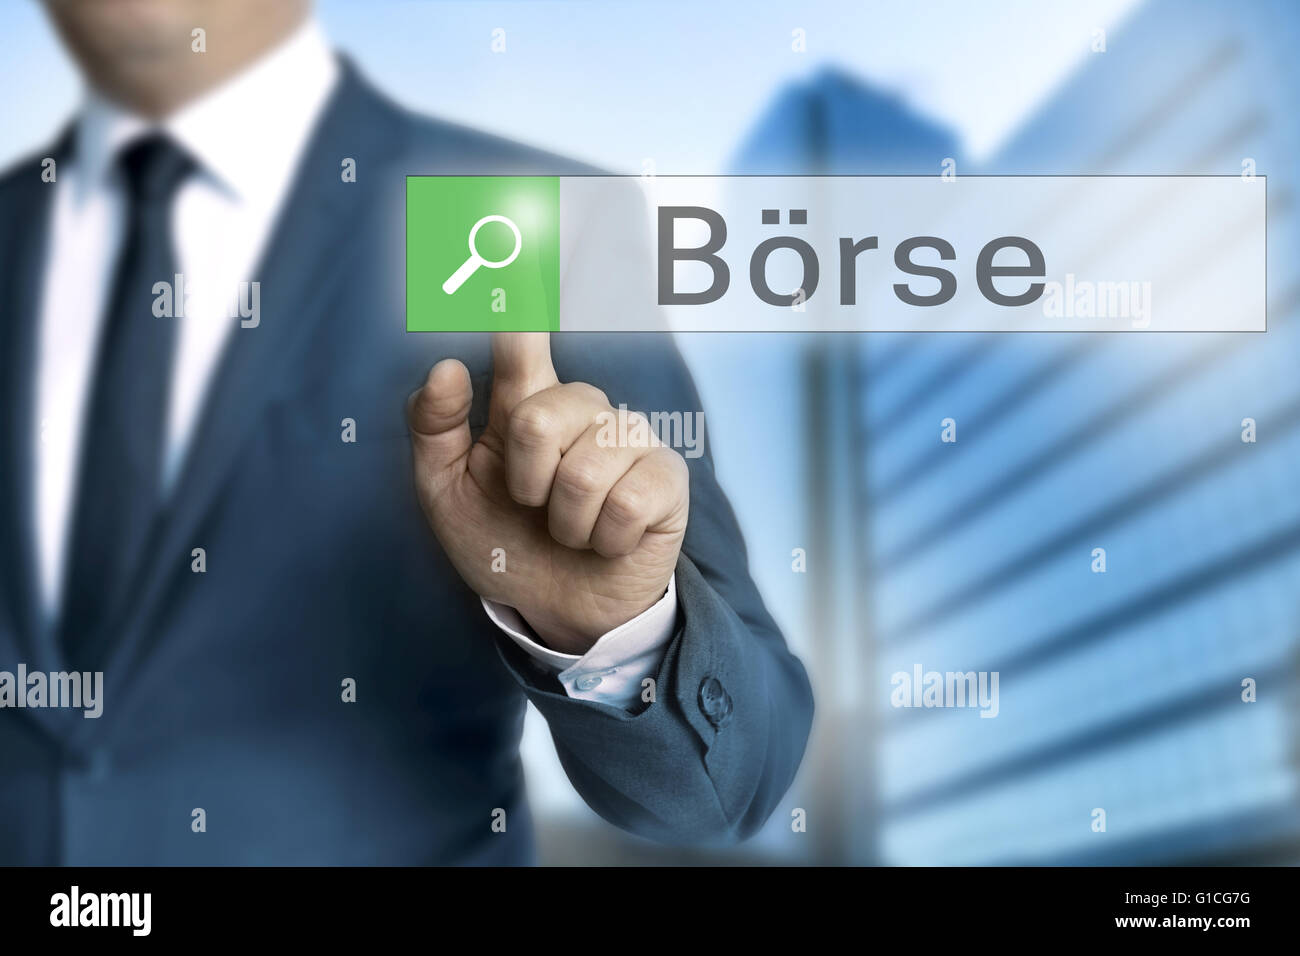 boerse (in german stock exchange) browser operated by businessman. Stock Photo